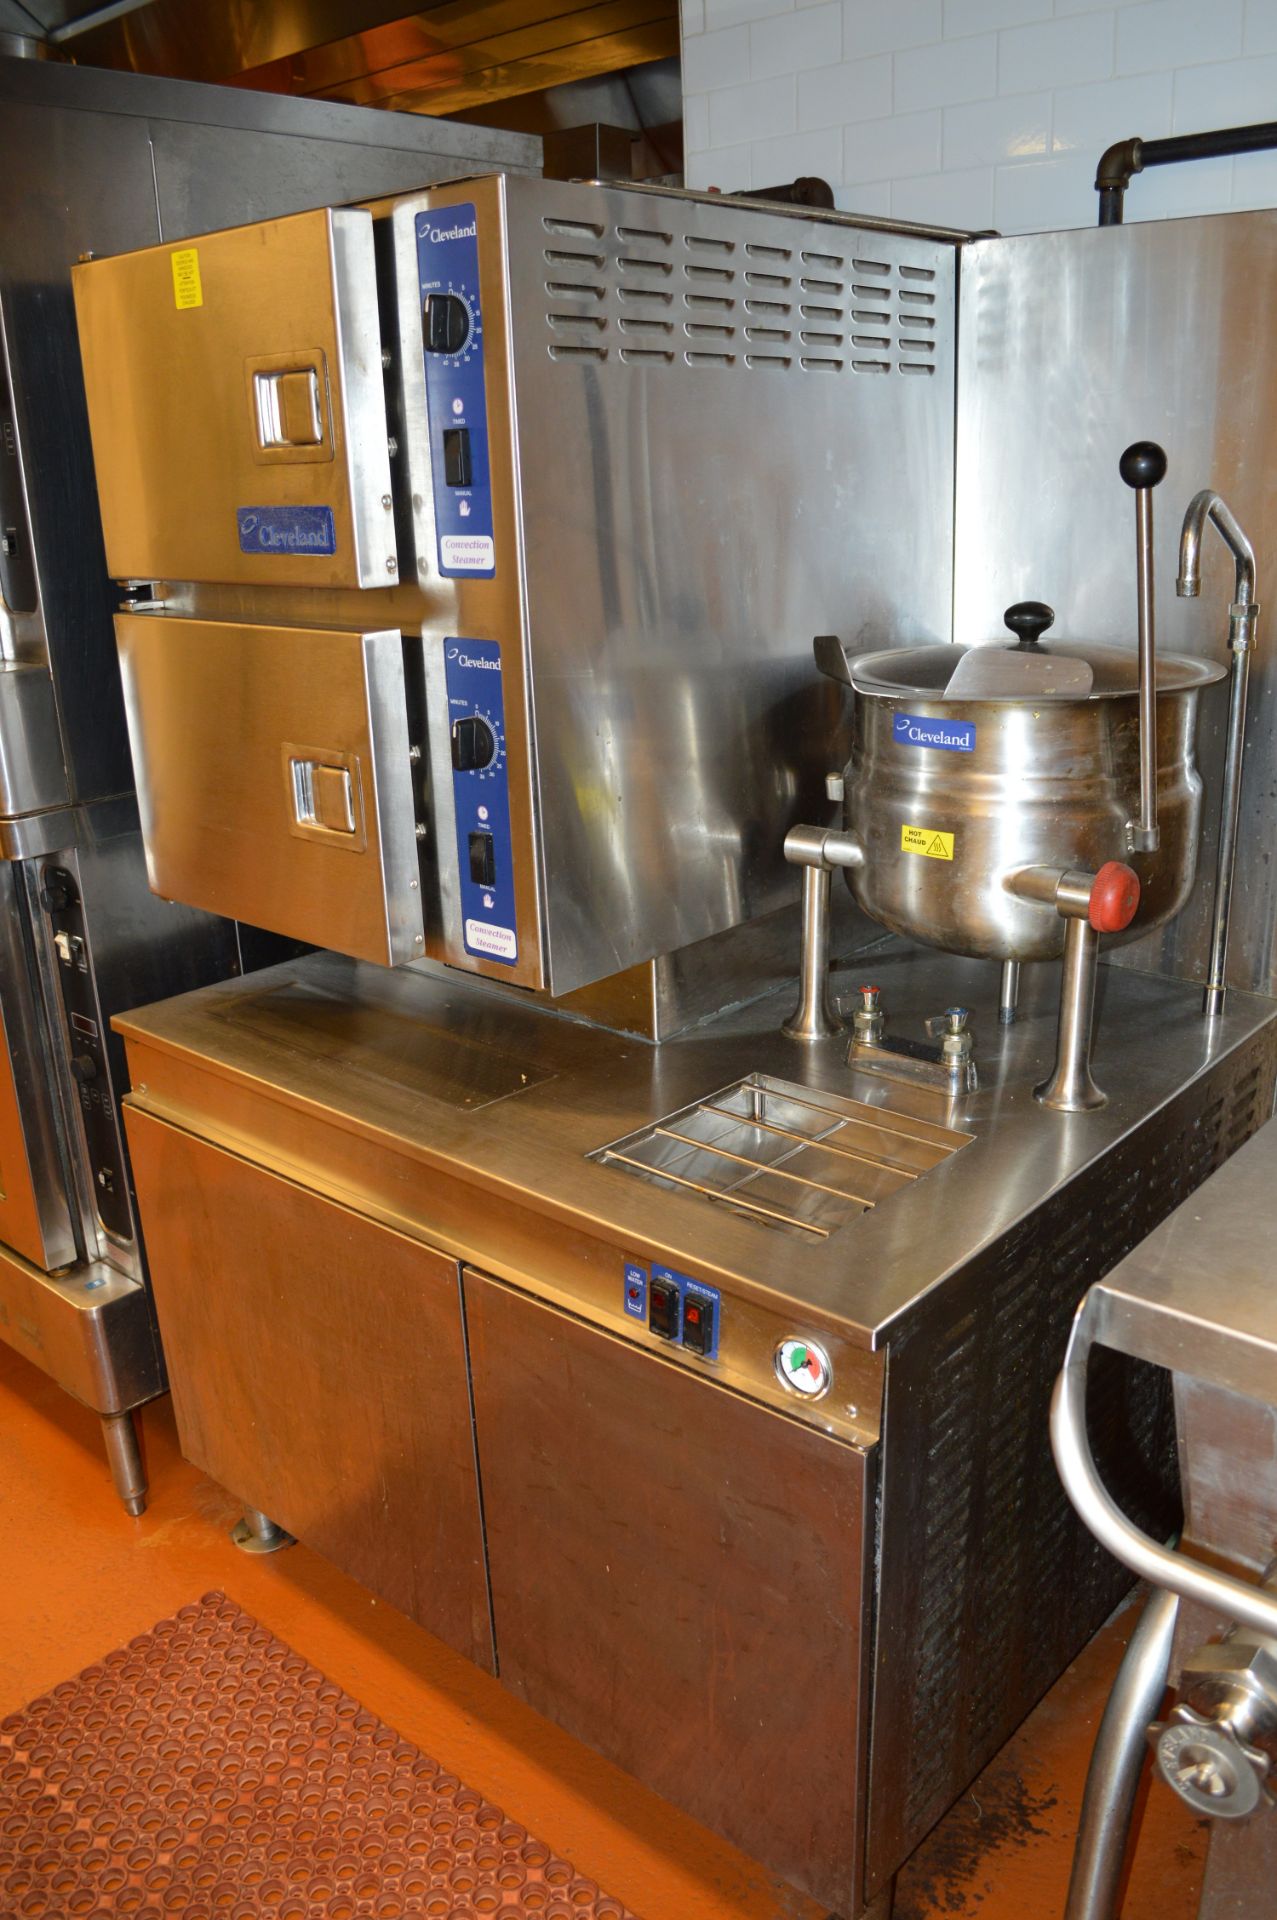 CLEVELAND STAINLESS STEEL 2 DOOR STEAMER WITH SIDE KETTLE. COMPLETE UNIT.